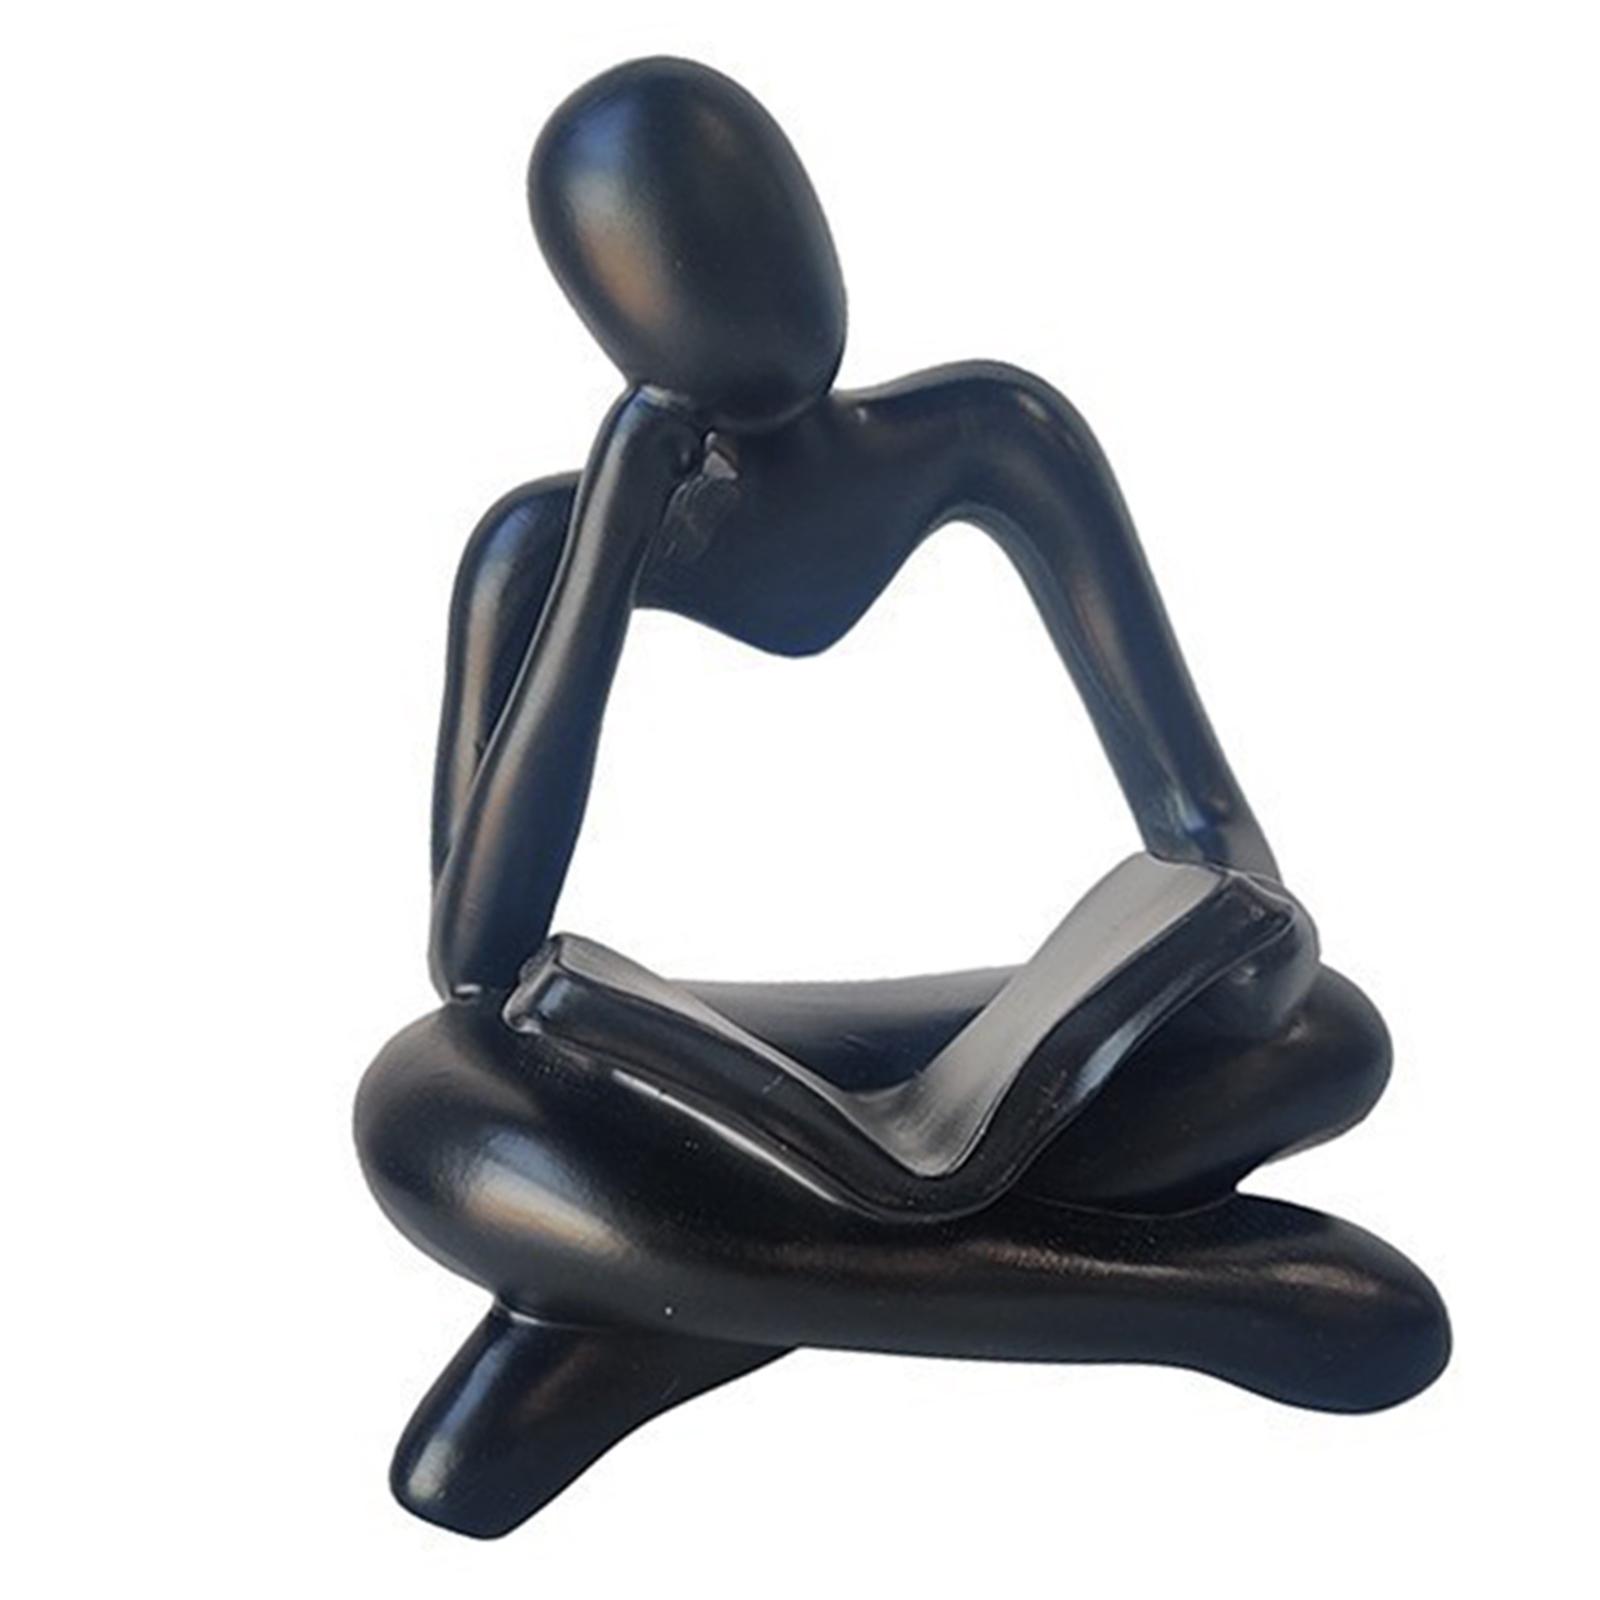 Abstract Thinker Statue Tabletop Decorative Sculpture for Home Hotel Decor Black